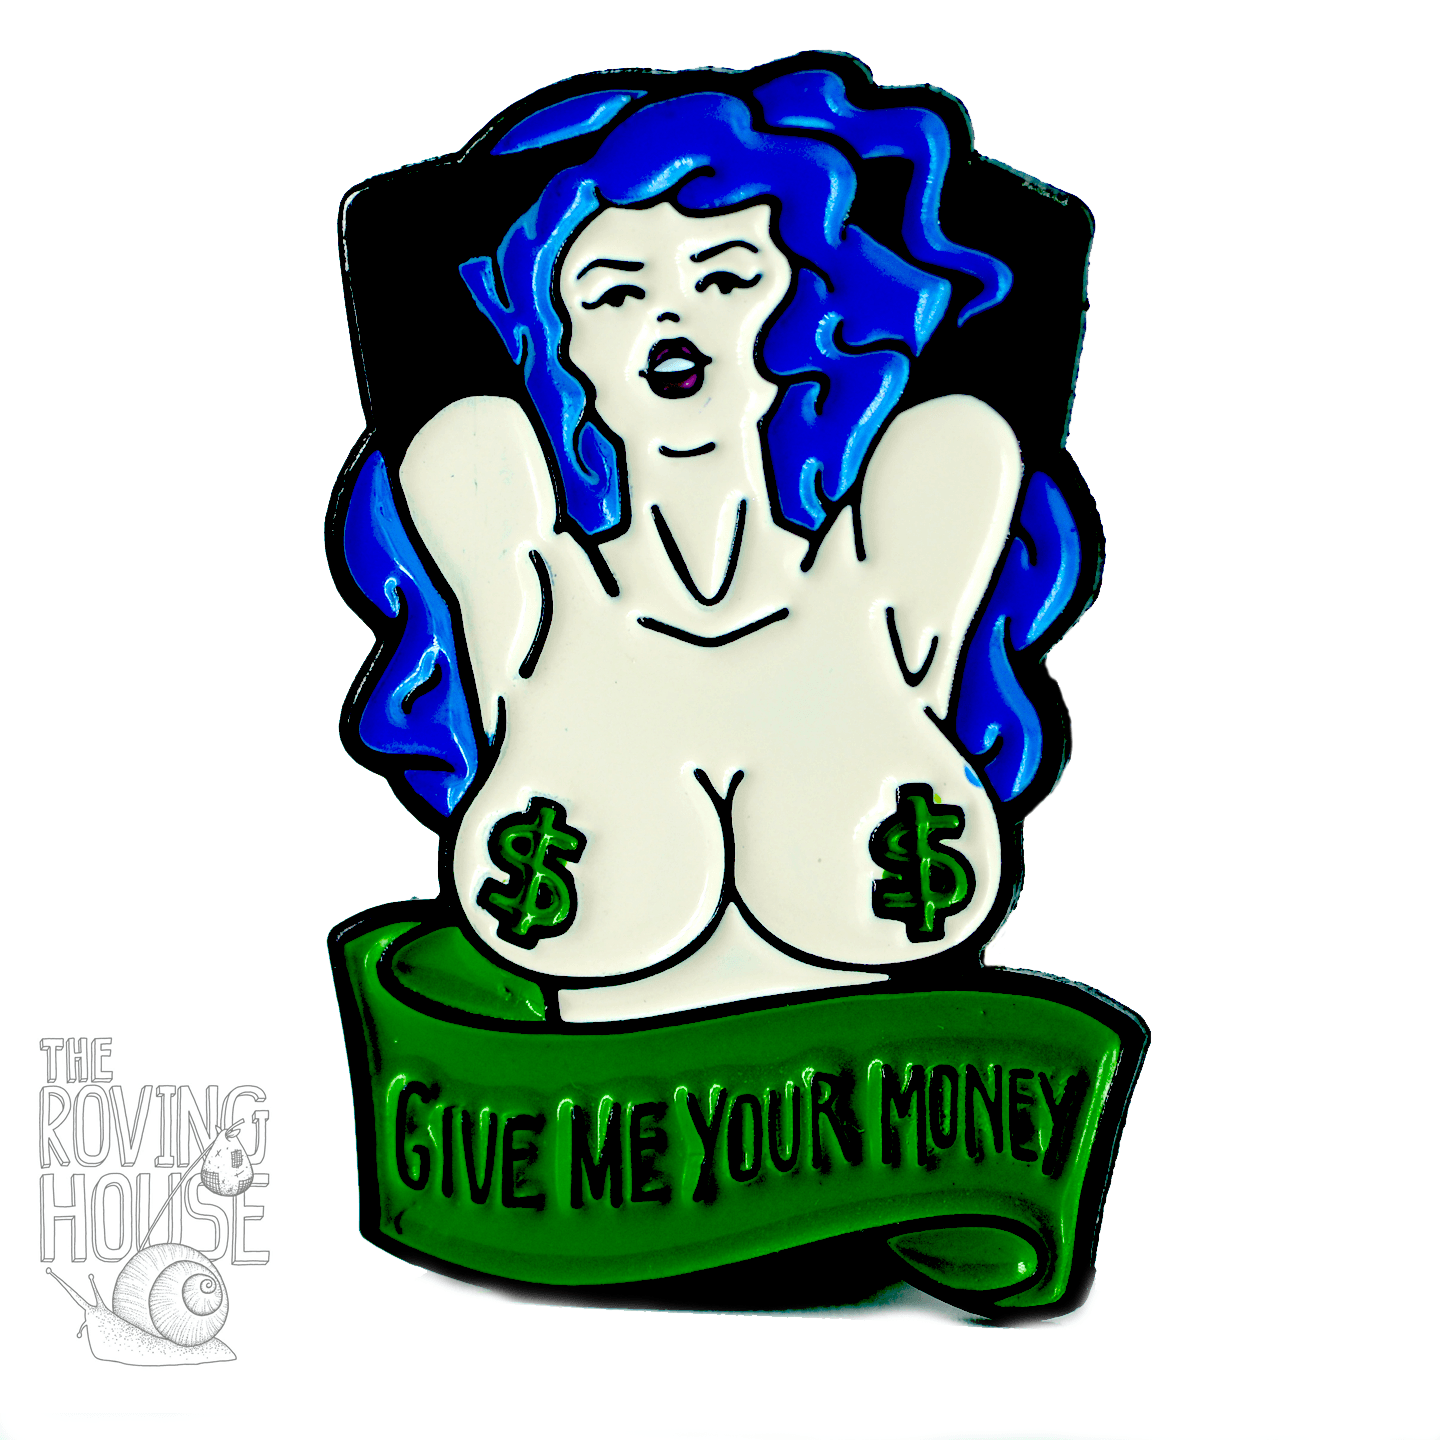 The original enamel pin featuring the bust of a topless, blue haired woman wearing green dollar sign pasties. Below her is a banner that says "GIVE ME YOUR MONEY".